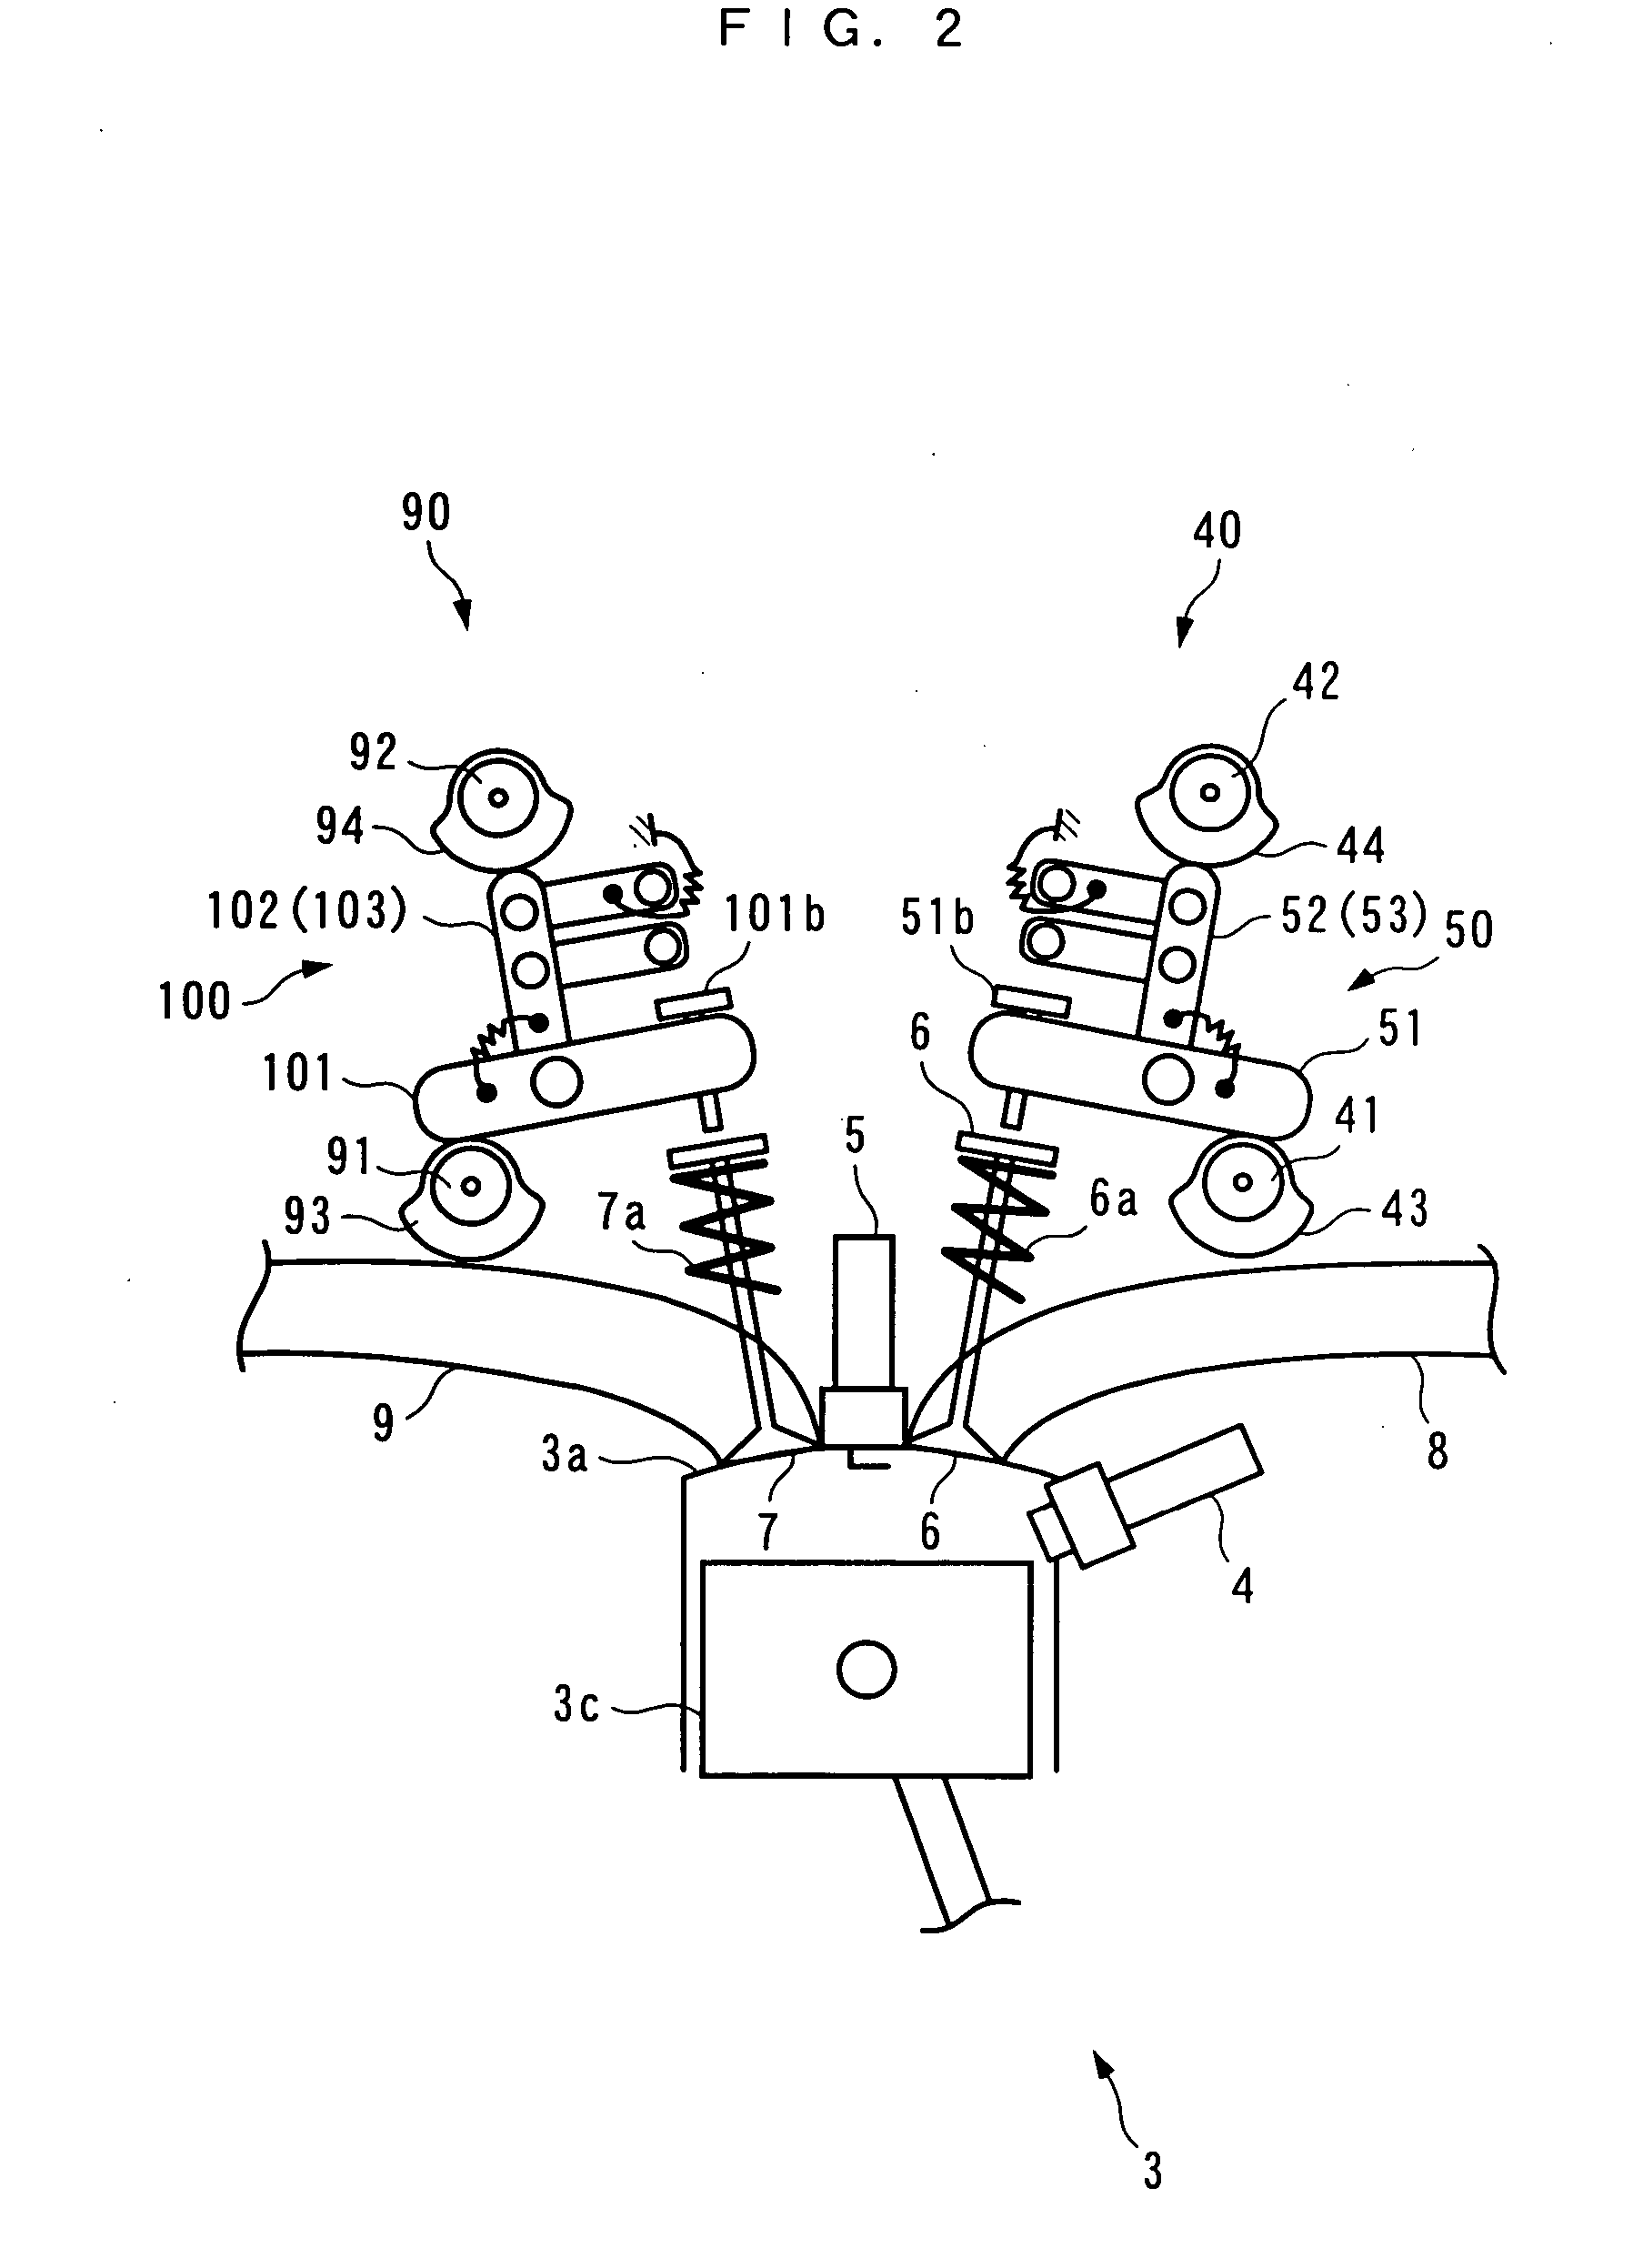 Intake airvolume controller of internal combustion engine